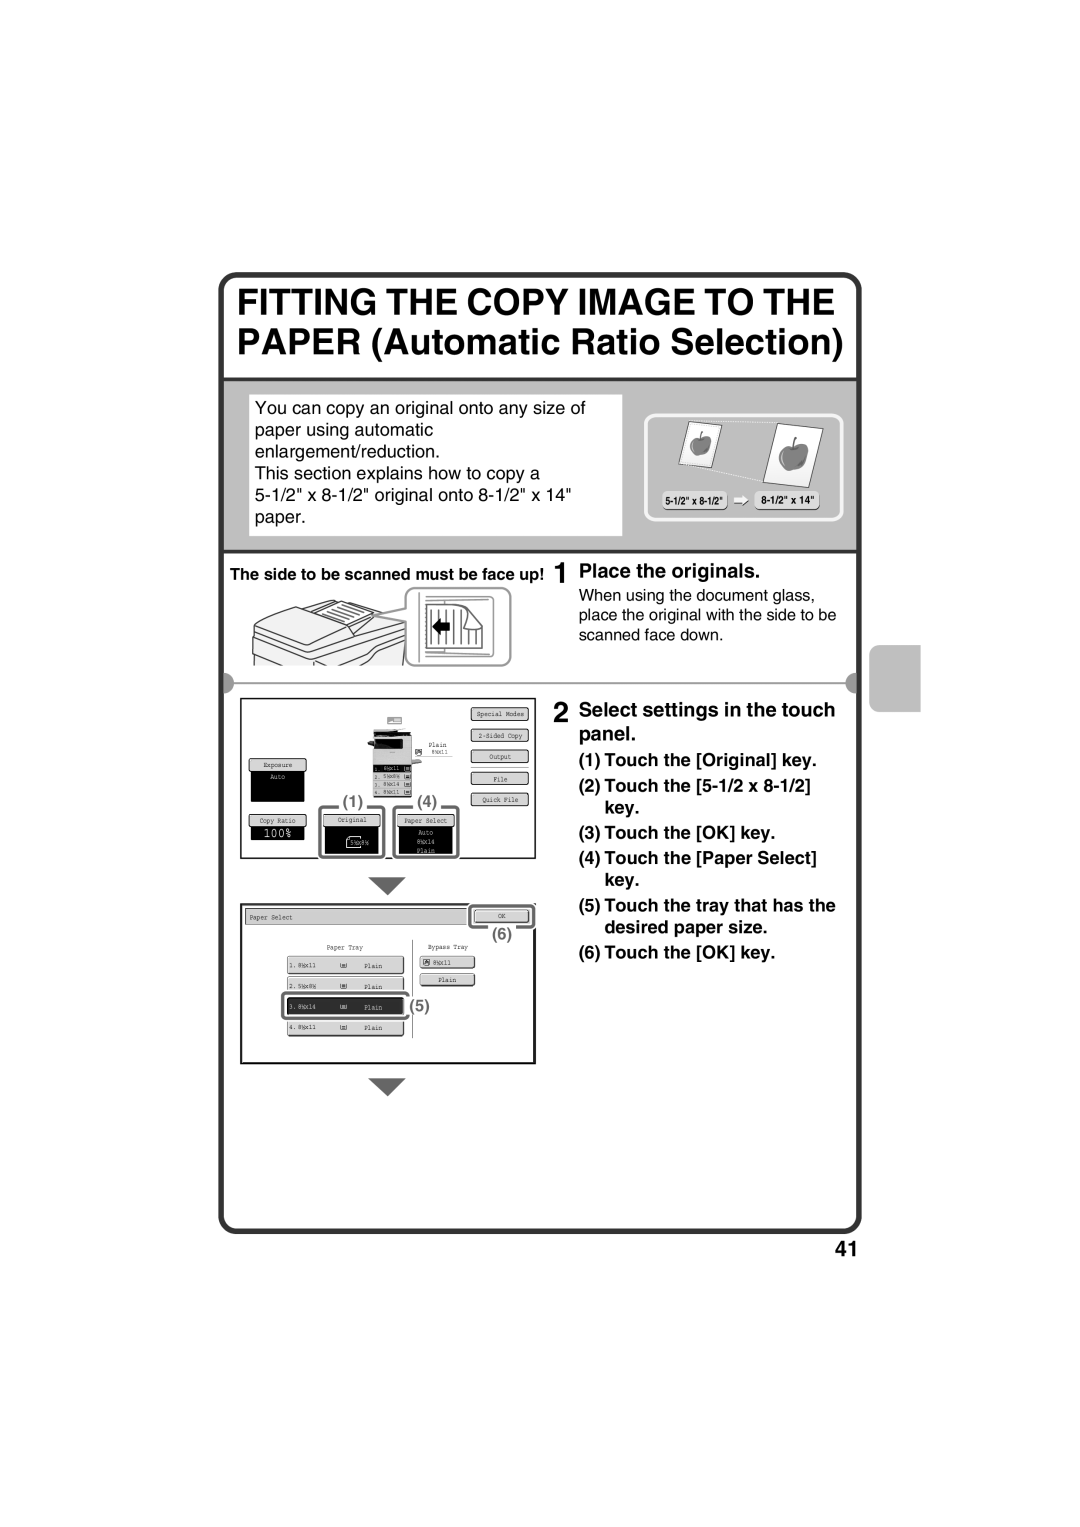 Sharp TINSE4377FCZZ FITTING THE COPY IMAGE TO THE PAPER Automatic Ratio Selection, Select settings in the touch panel 